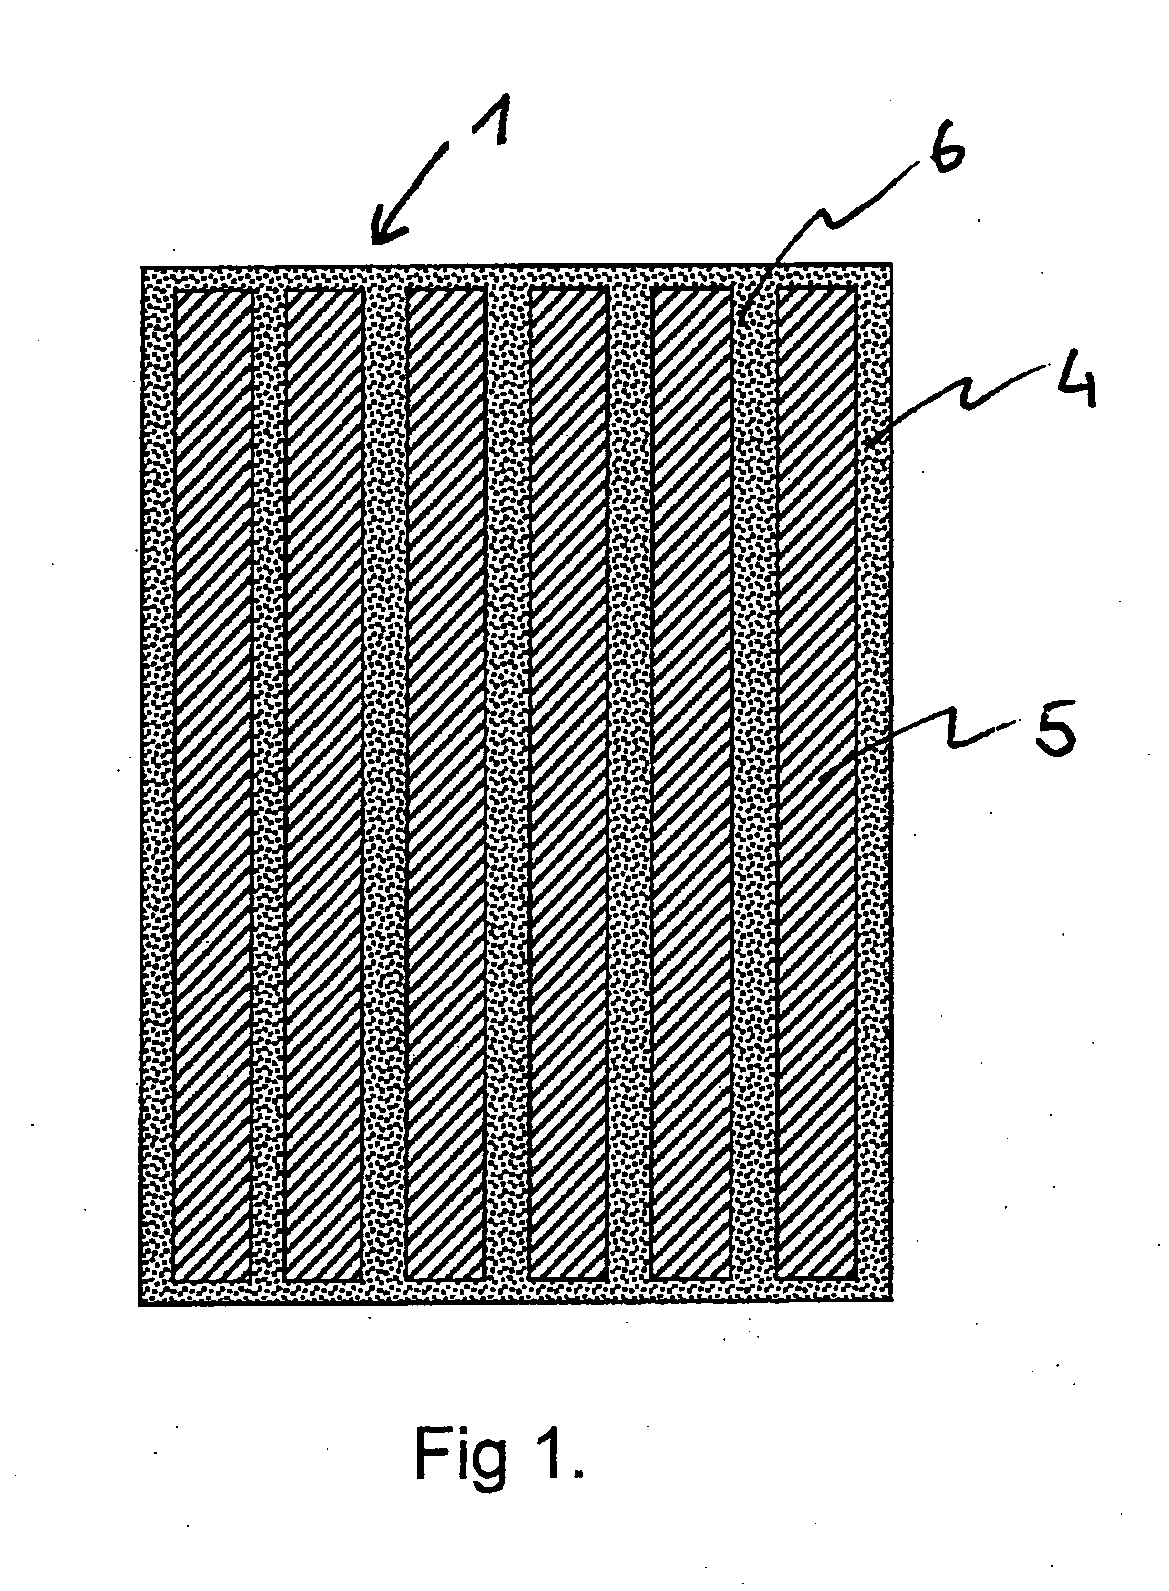 Apparatus, method and use for screening the magnetic field of an RFID transponder